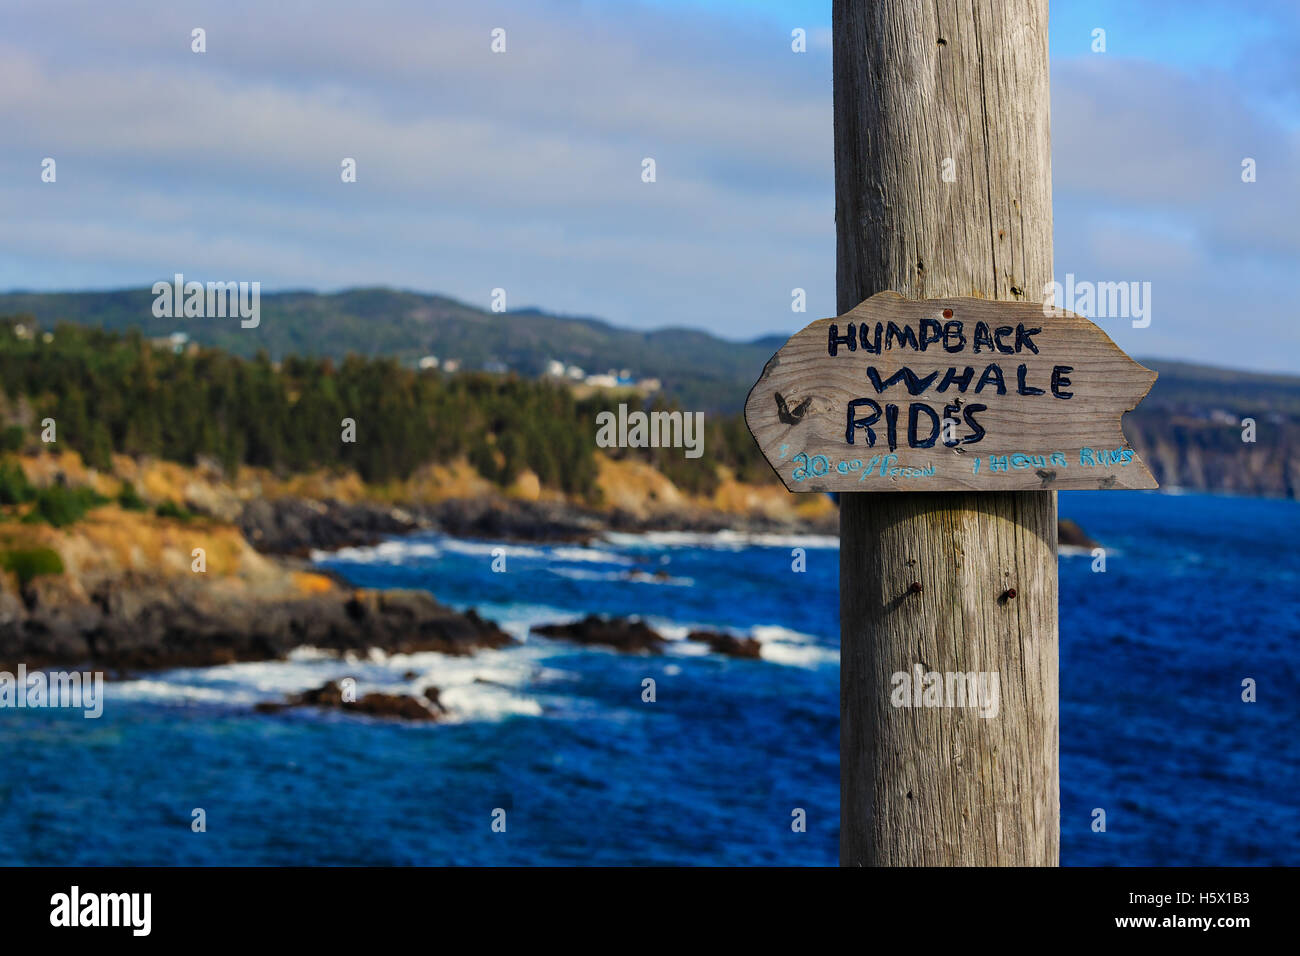 A sign for a fake yet humorous humpback whale ride tour found along the rugged Newfoundland coastline. Stock Photo